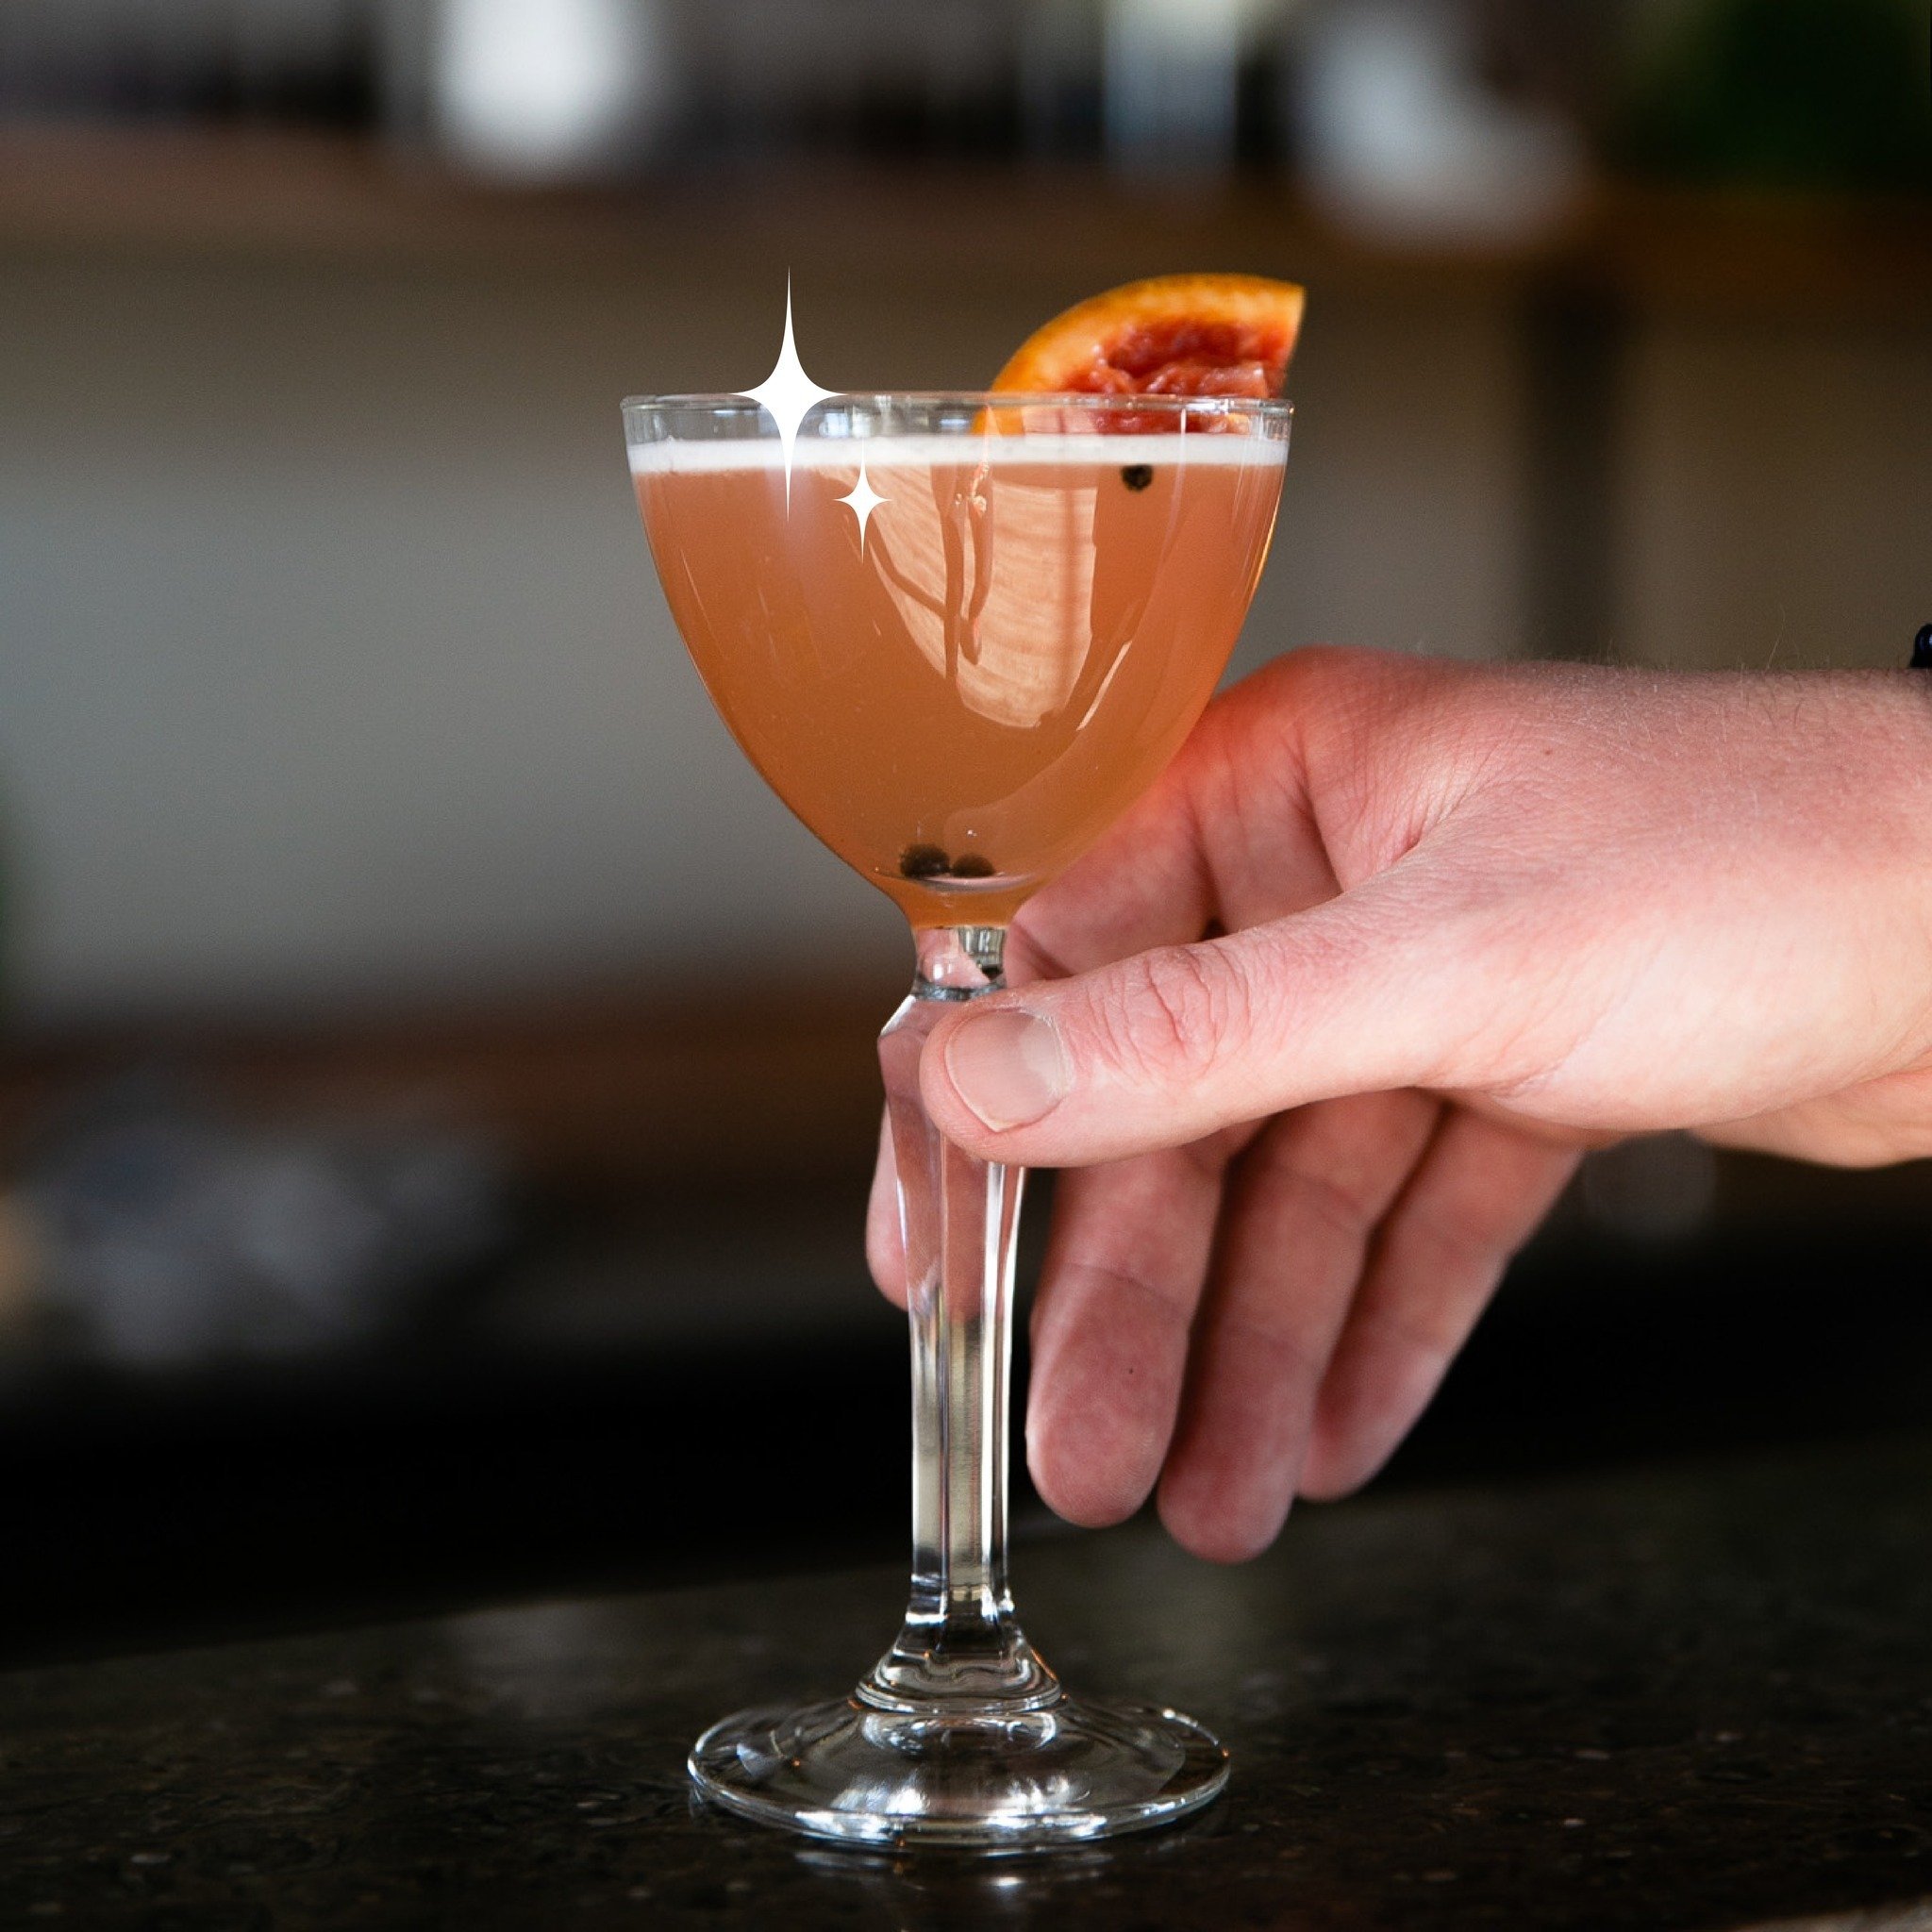 We're *shaking* and *stirring* with excitement to host Columbus Monthly's Cocktail Competition next week! 🍸 

Bartenders from some of central Ohio's favorite bars will come to The Fives to showcase their skills and compete for the most creative cock